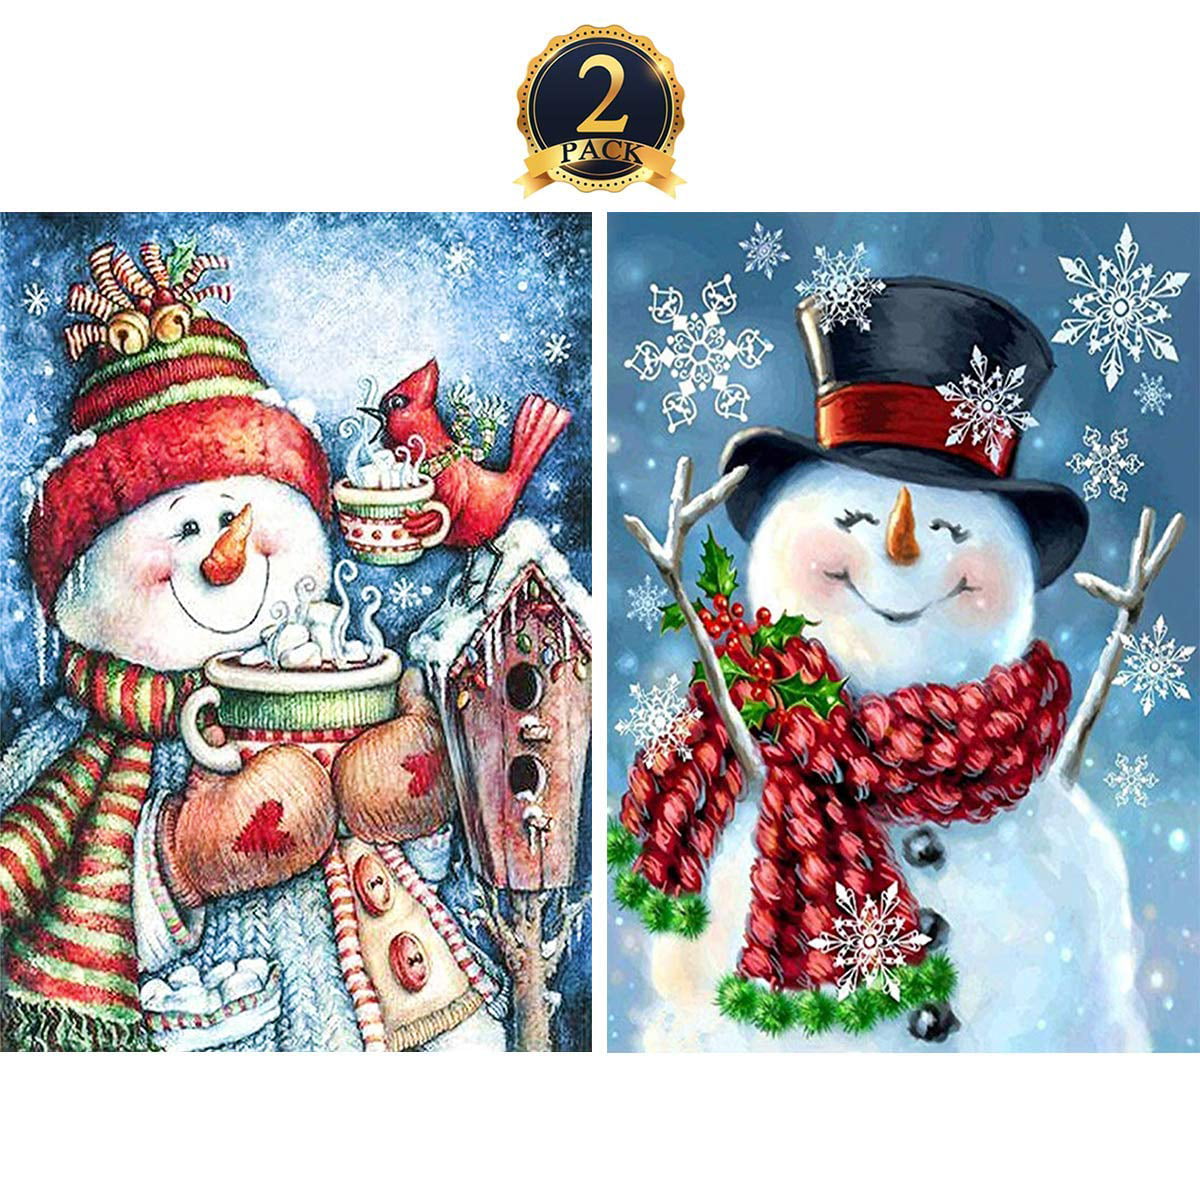 Happy New Year Christmas Snowman Diamond Art Full Drill Embroidery Craft DIY 5D Diamond Painting Kits for Adults 30x40 30x30*2